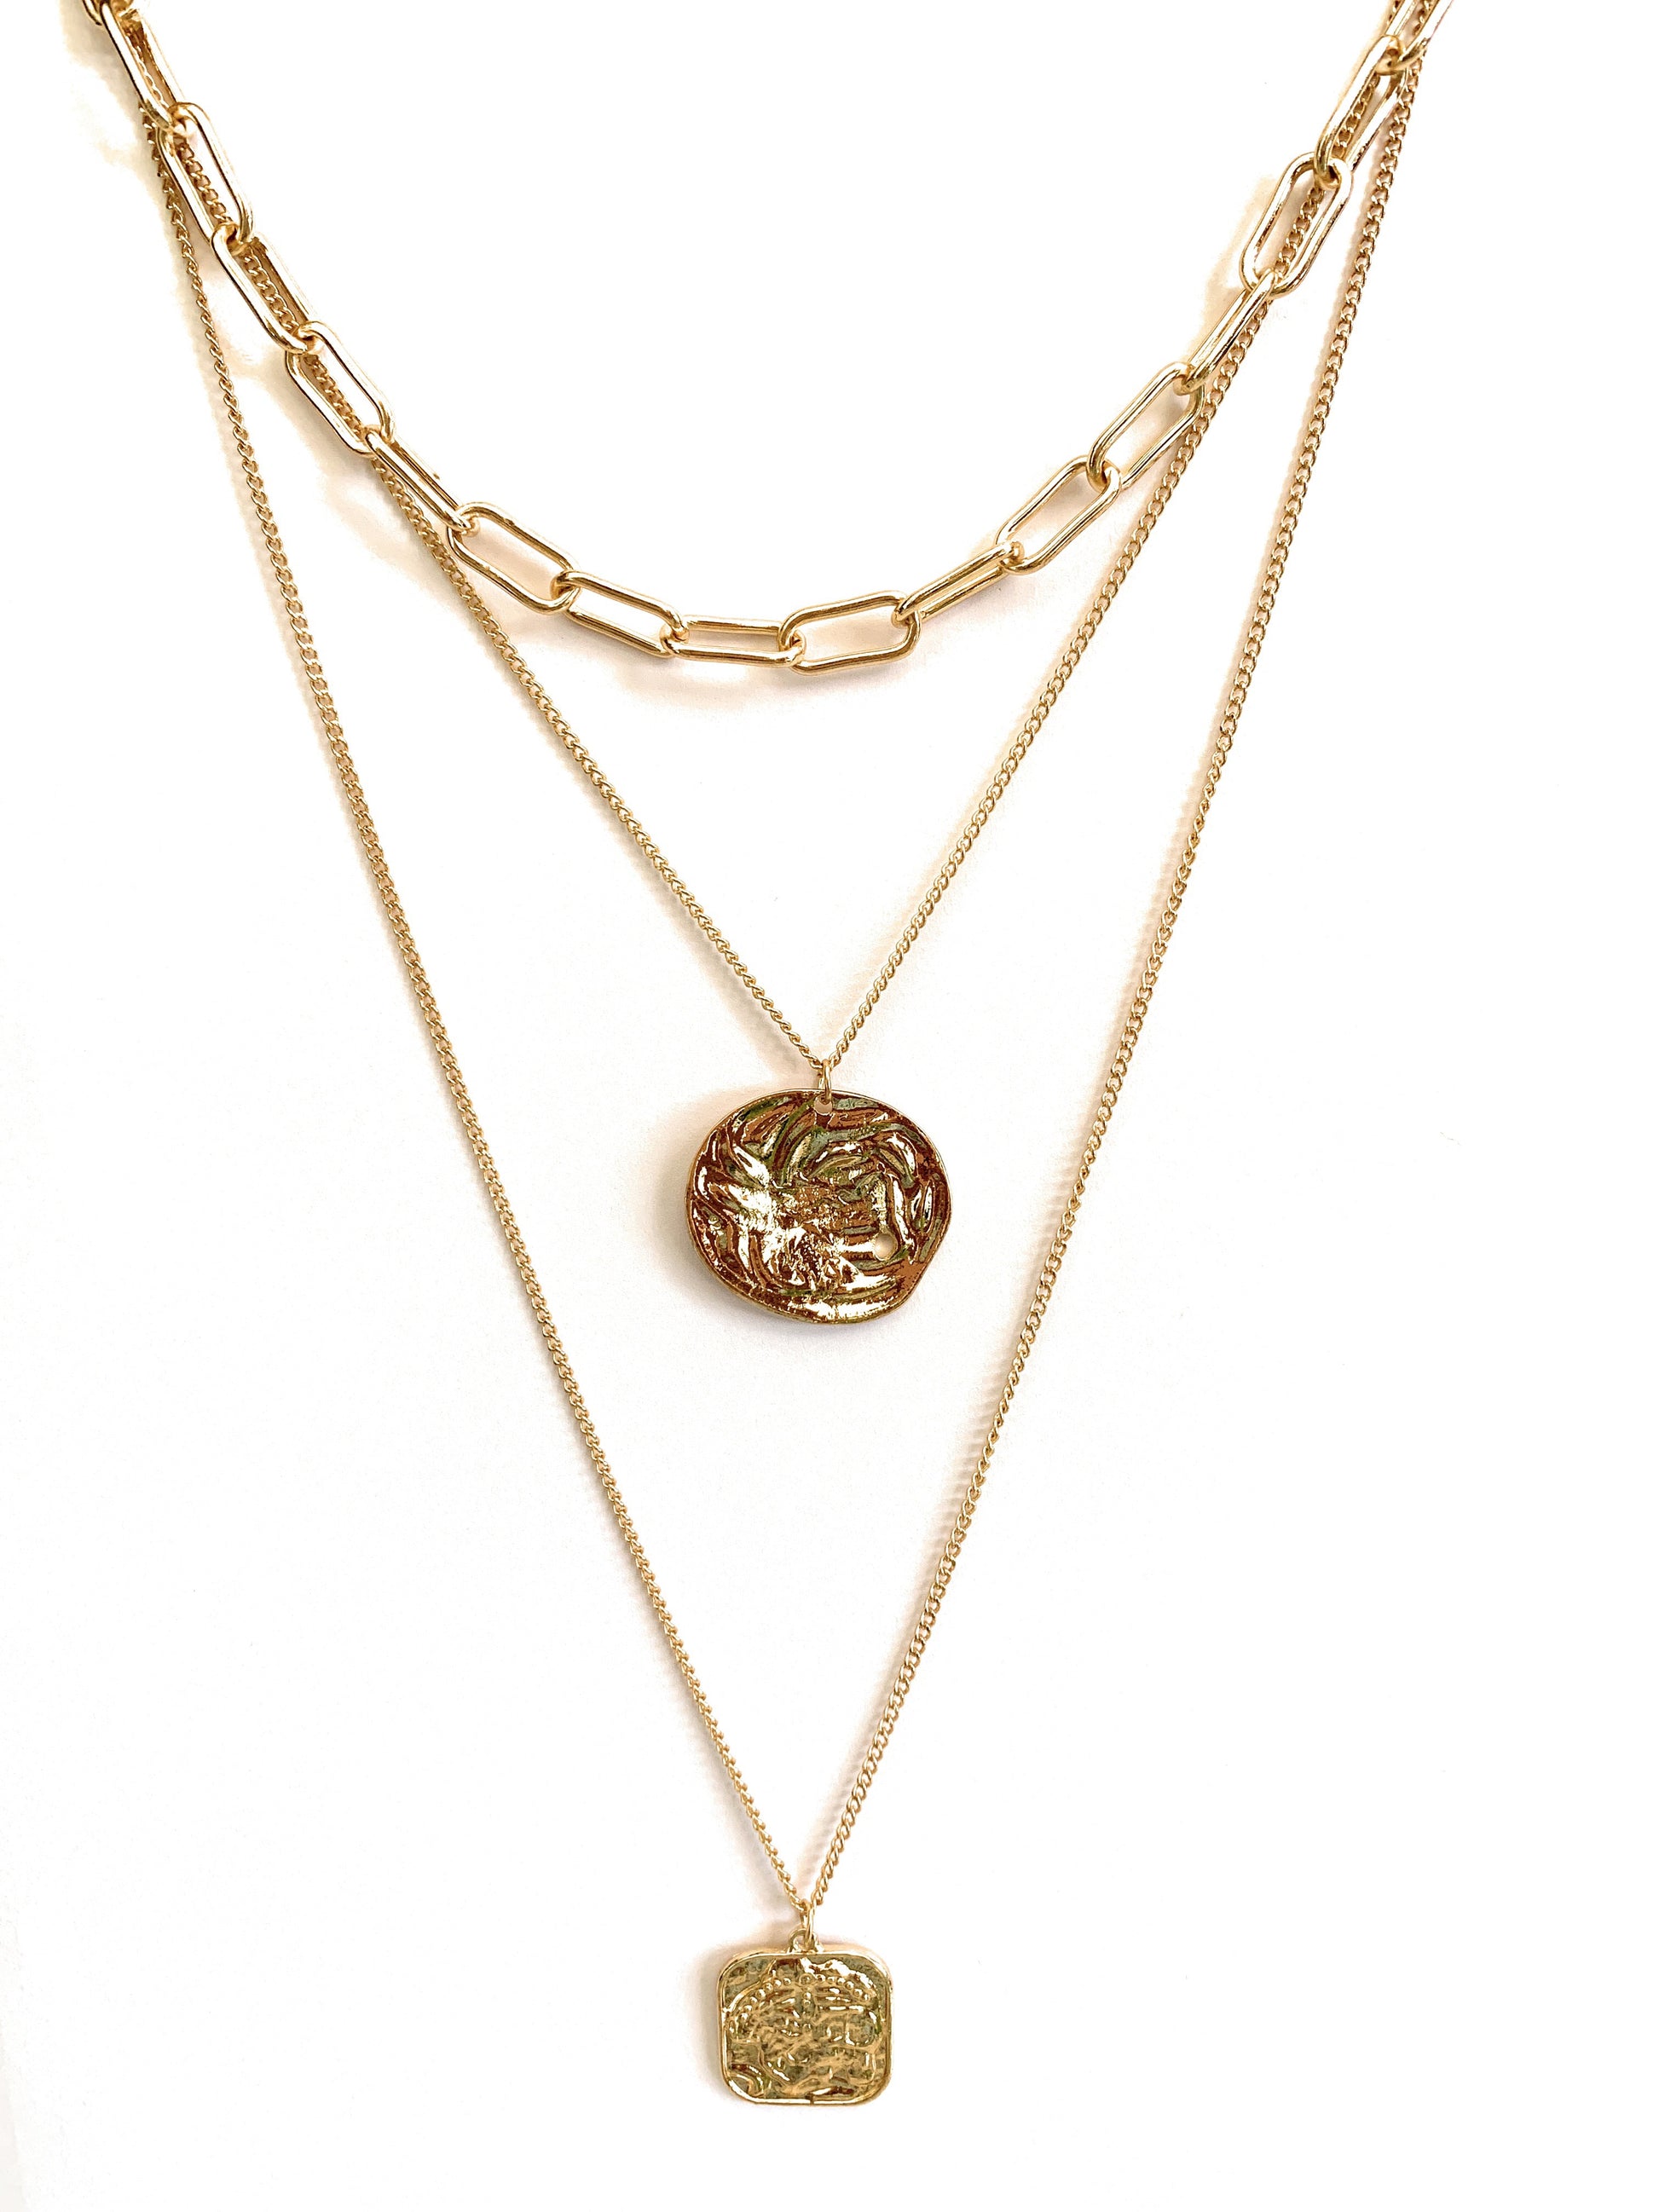 Multi Layered Necklace with Coin and Square Pendant-Hollywood Sensation®